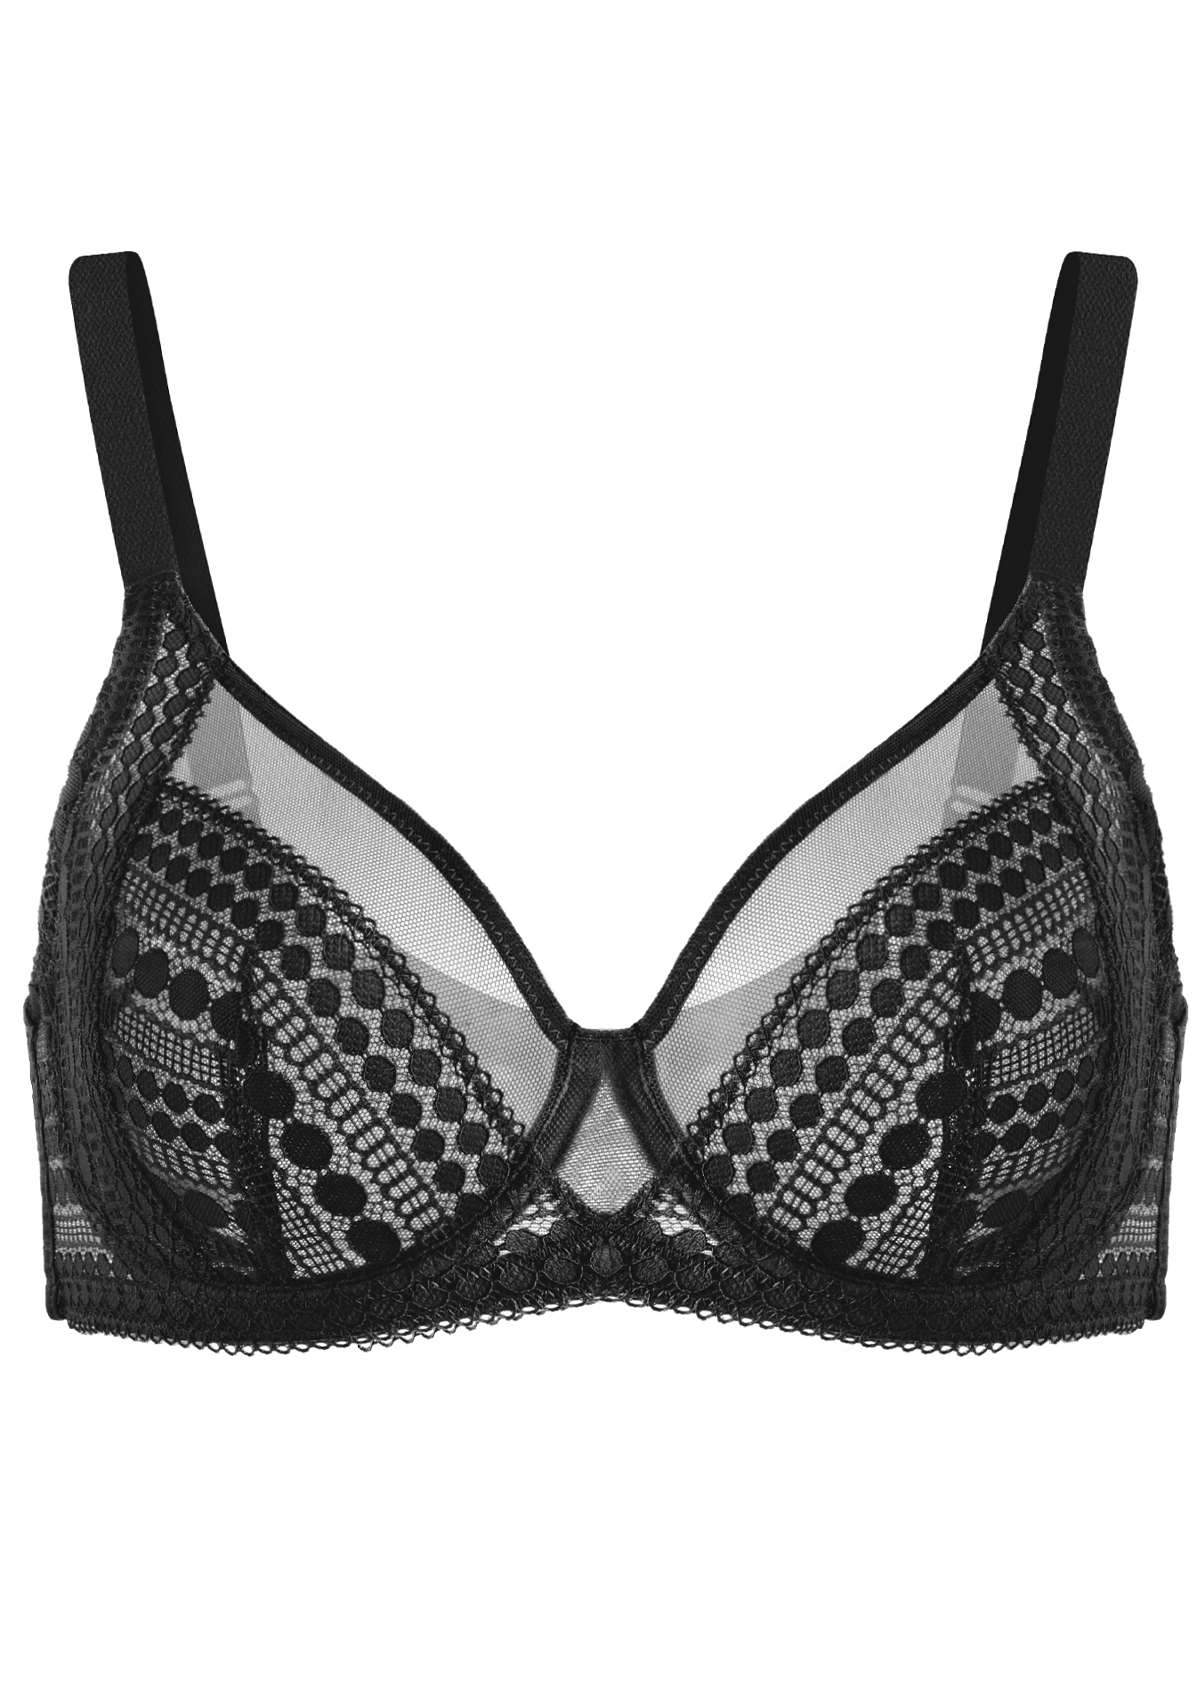 HSIA Heroine Matching Bra And Panties: Unlined Lace Unpadded Bra - Black / 36 / D